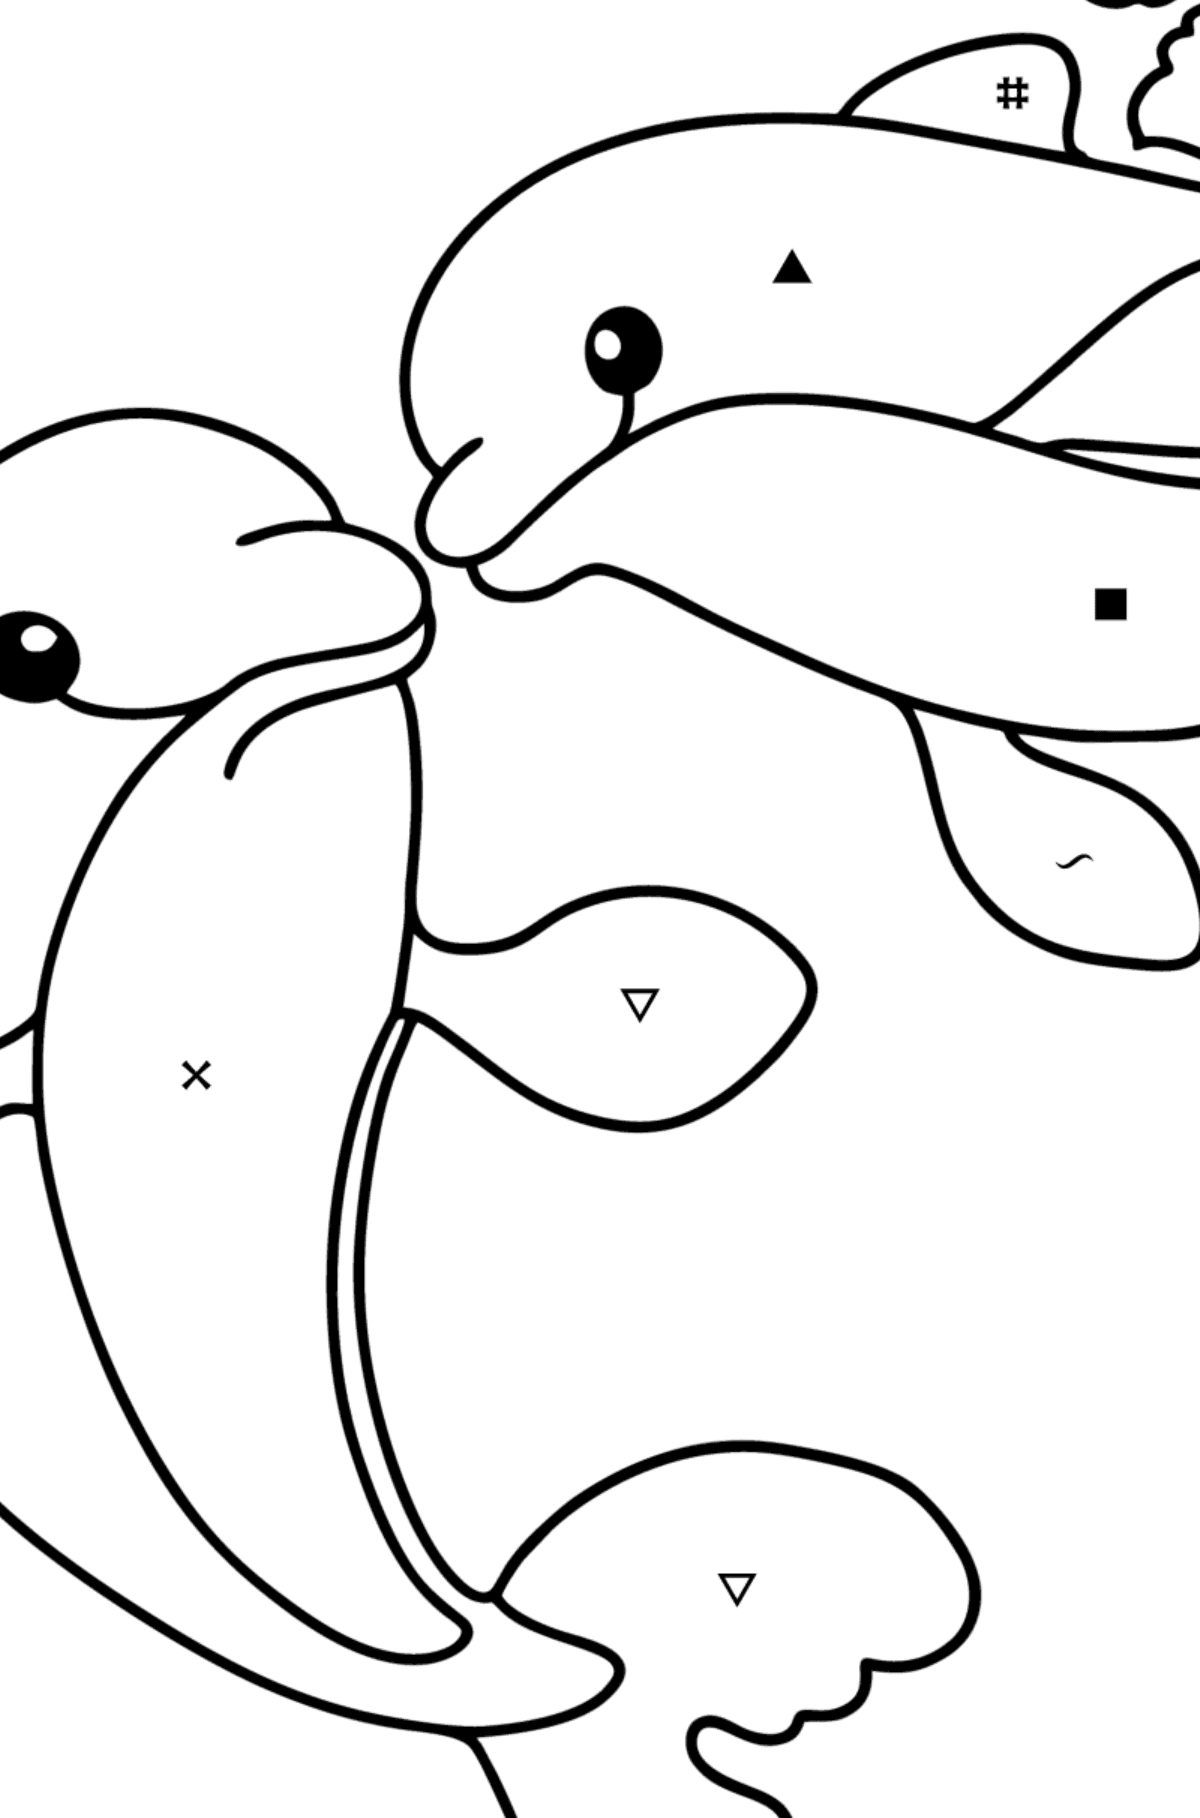 Cute Dolphins coloring page - Coloring by Symbols for Kids